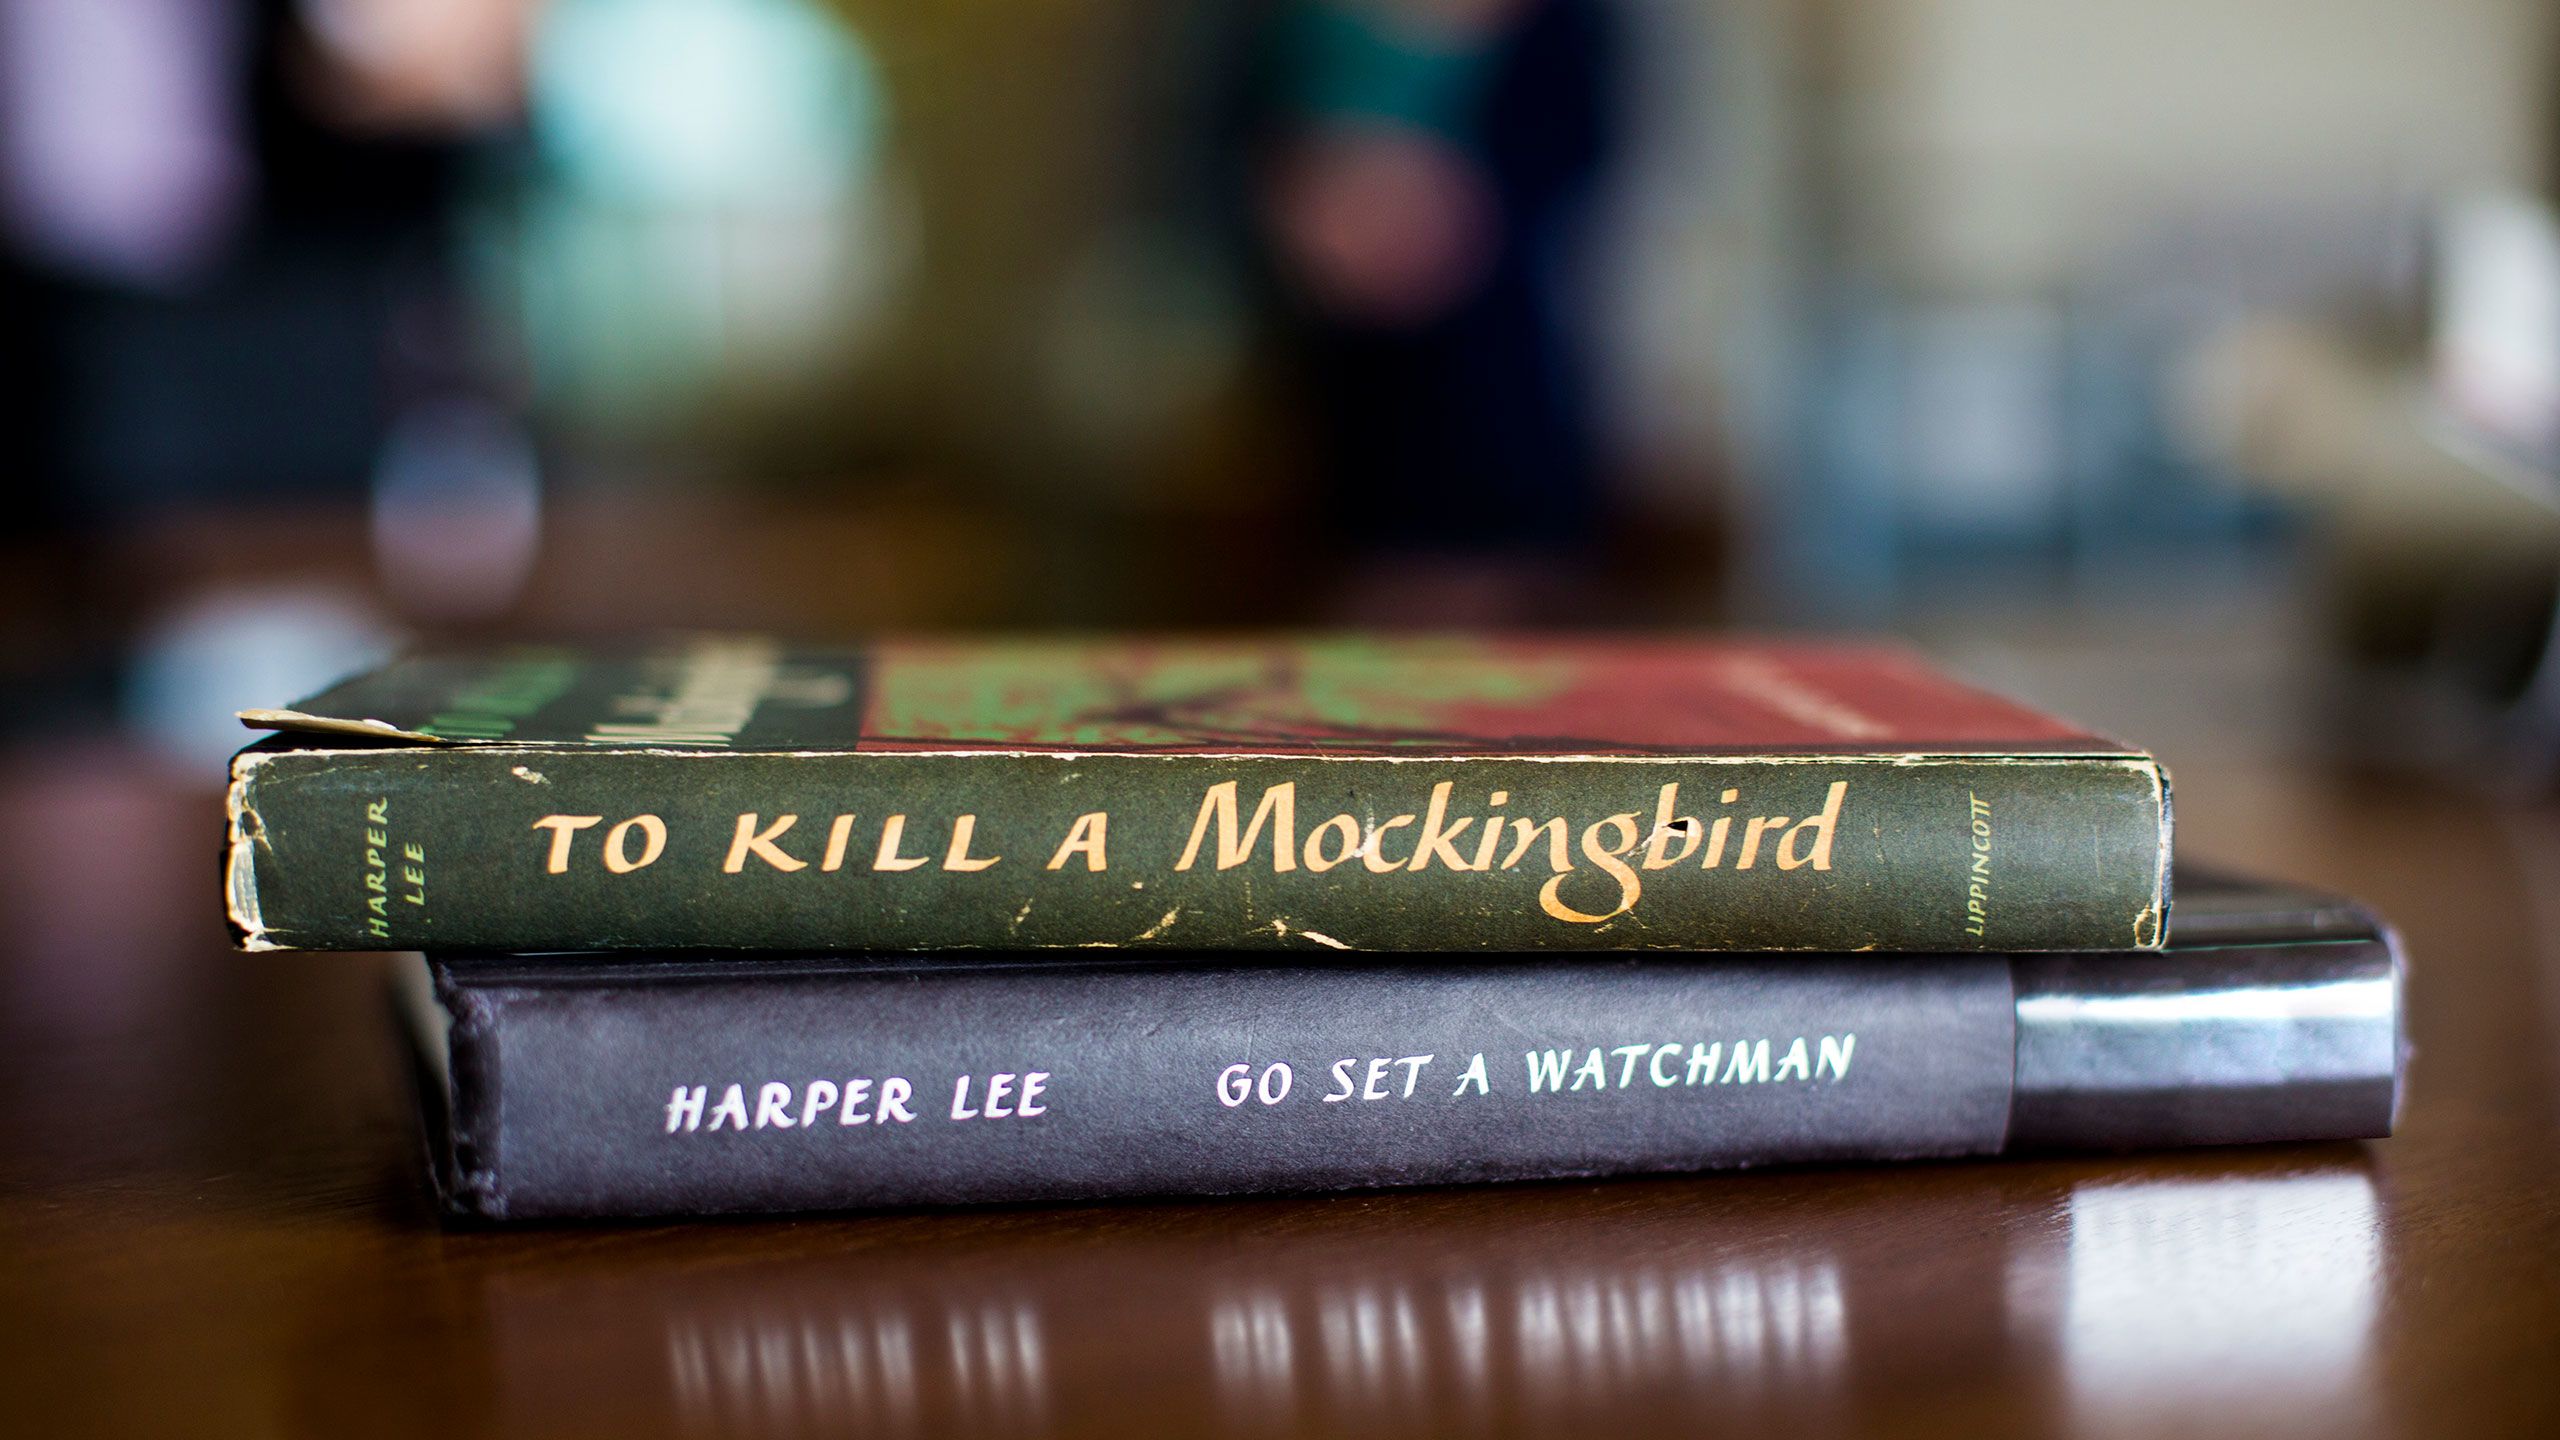 The books "To Kill a Mockingbird" and "Go Set a Watchman" by Harper Lee sit on a table in Emory University's Rose Library.